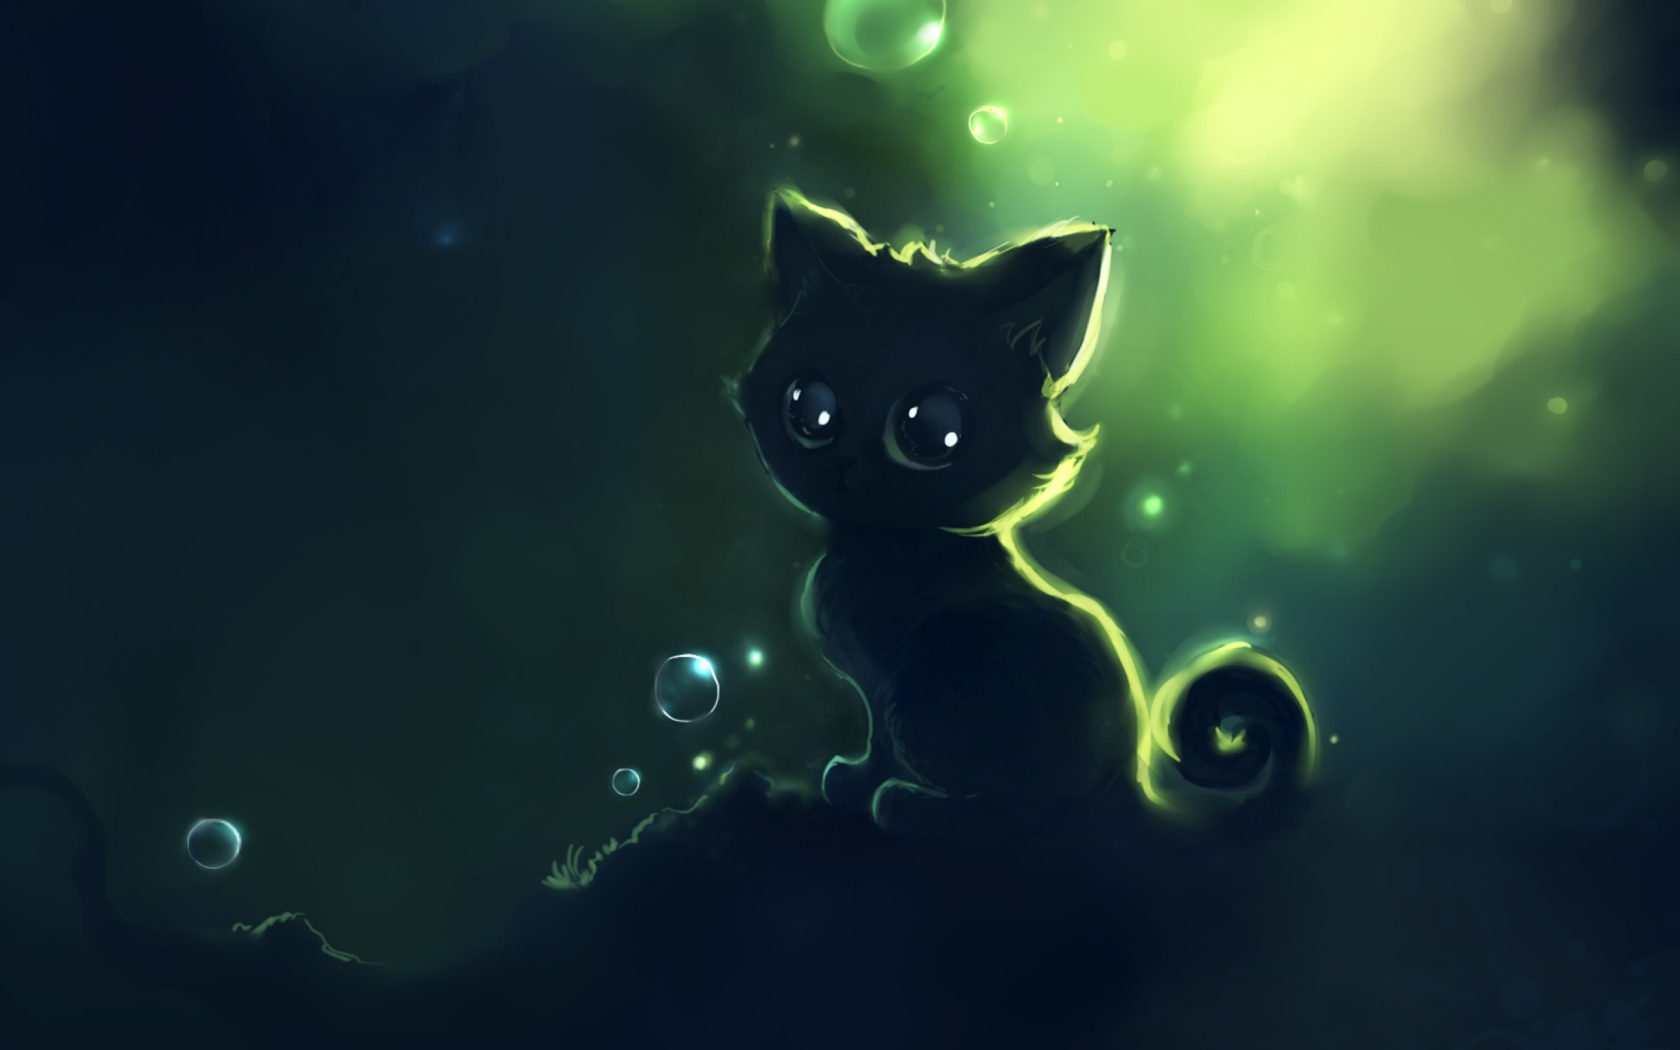 Lonely Black Kitty Painting wallpaper 1680x1050